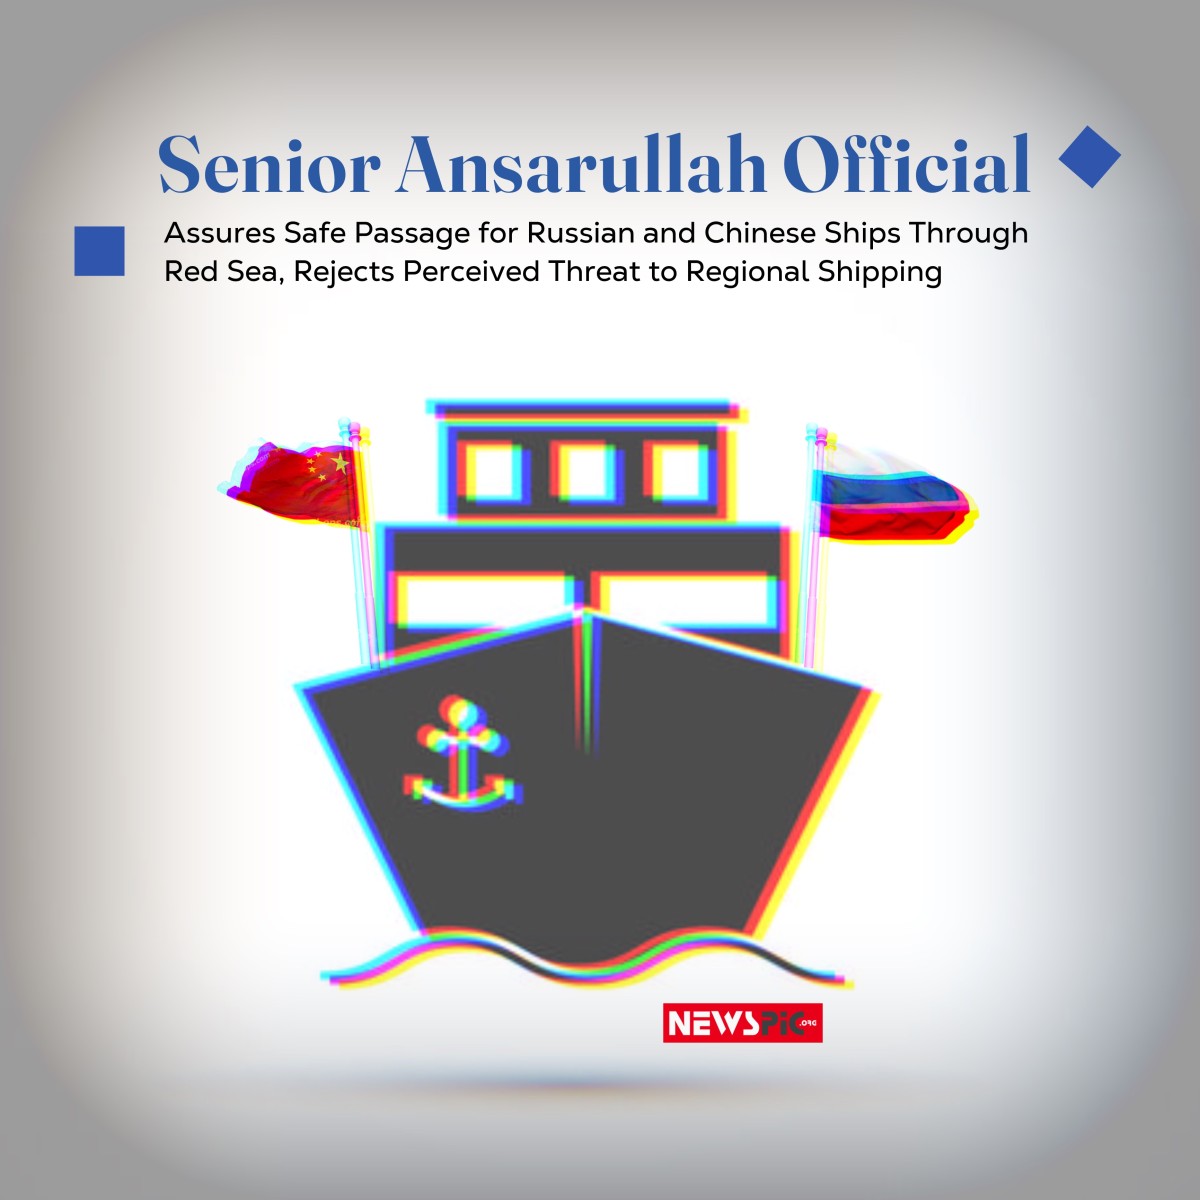 Senior Ansarullah Official Assures Safe Passage for Russian and Chinese Ships Through Red Sea, Rejects Perceived Threat to Regional Shipping